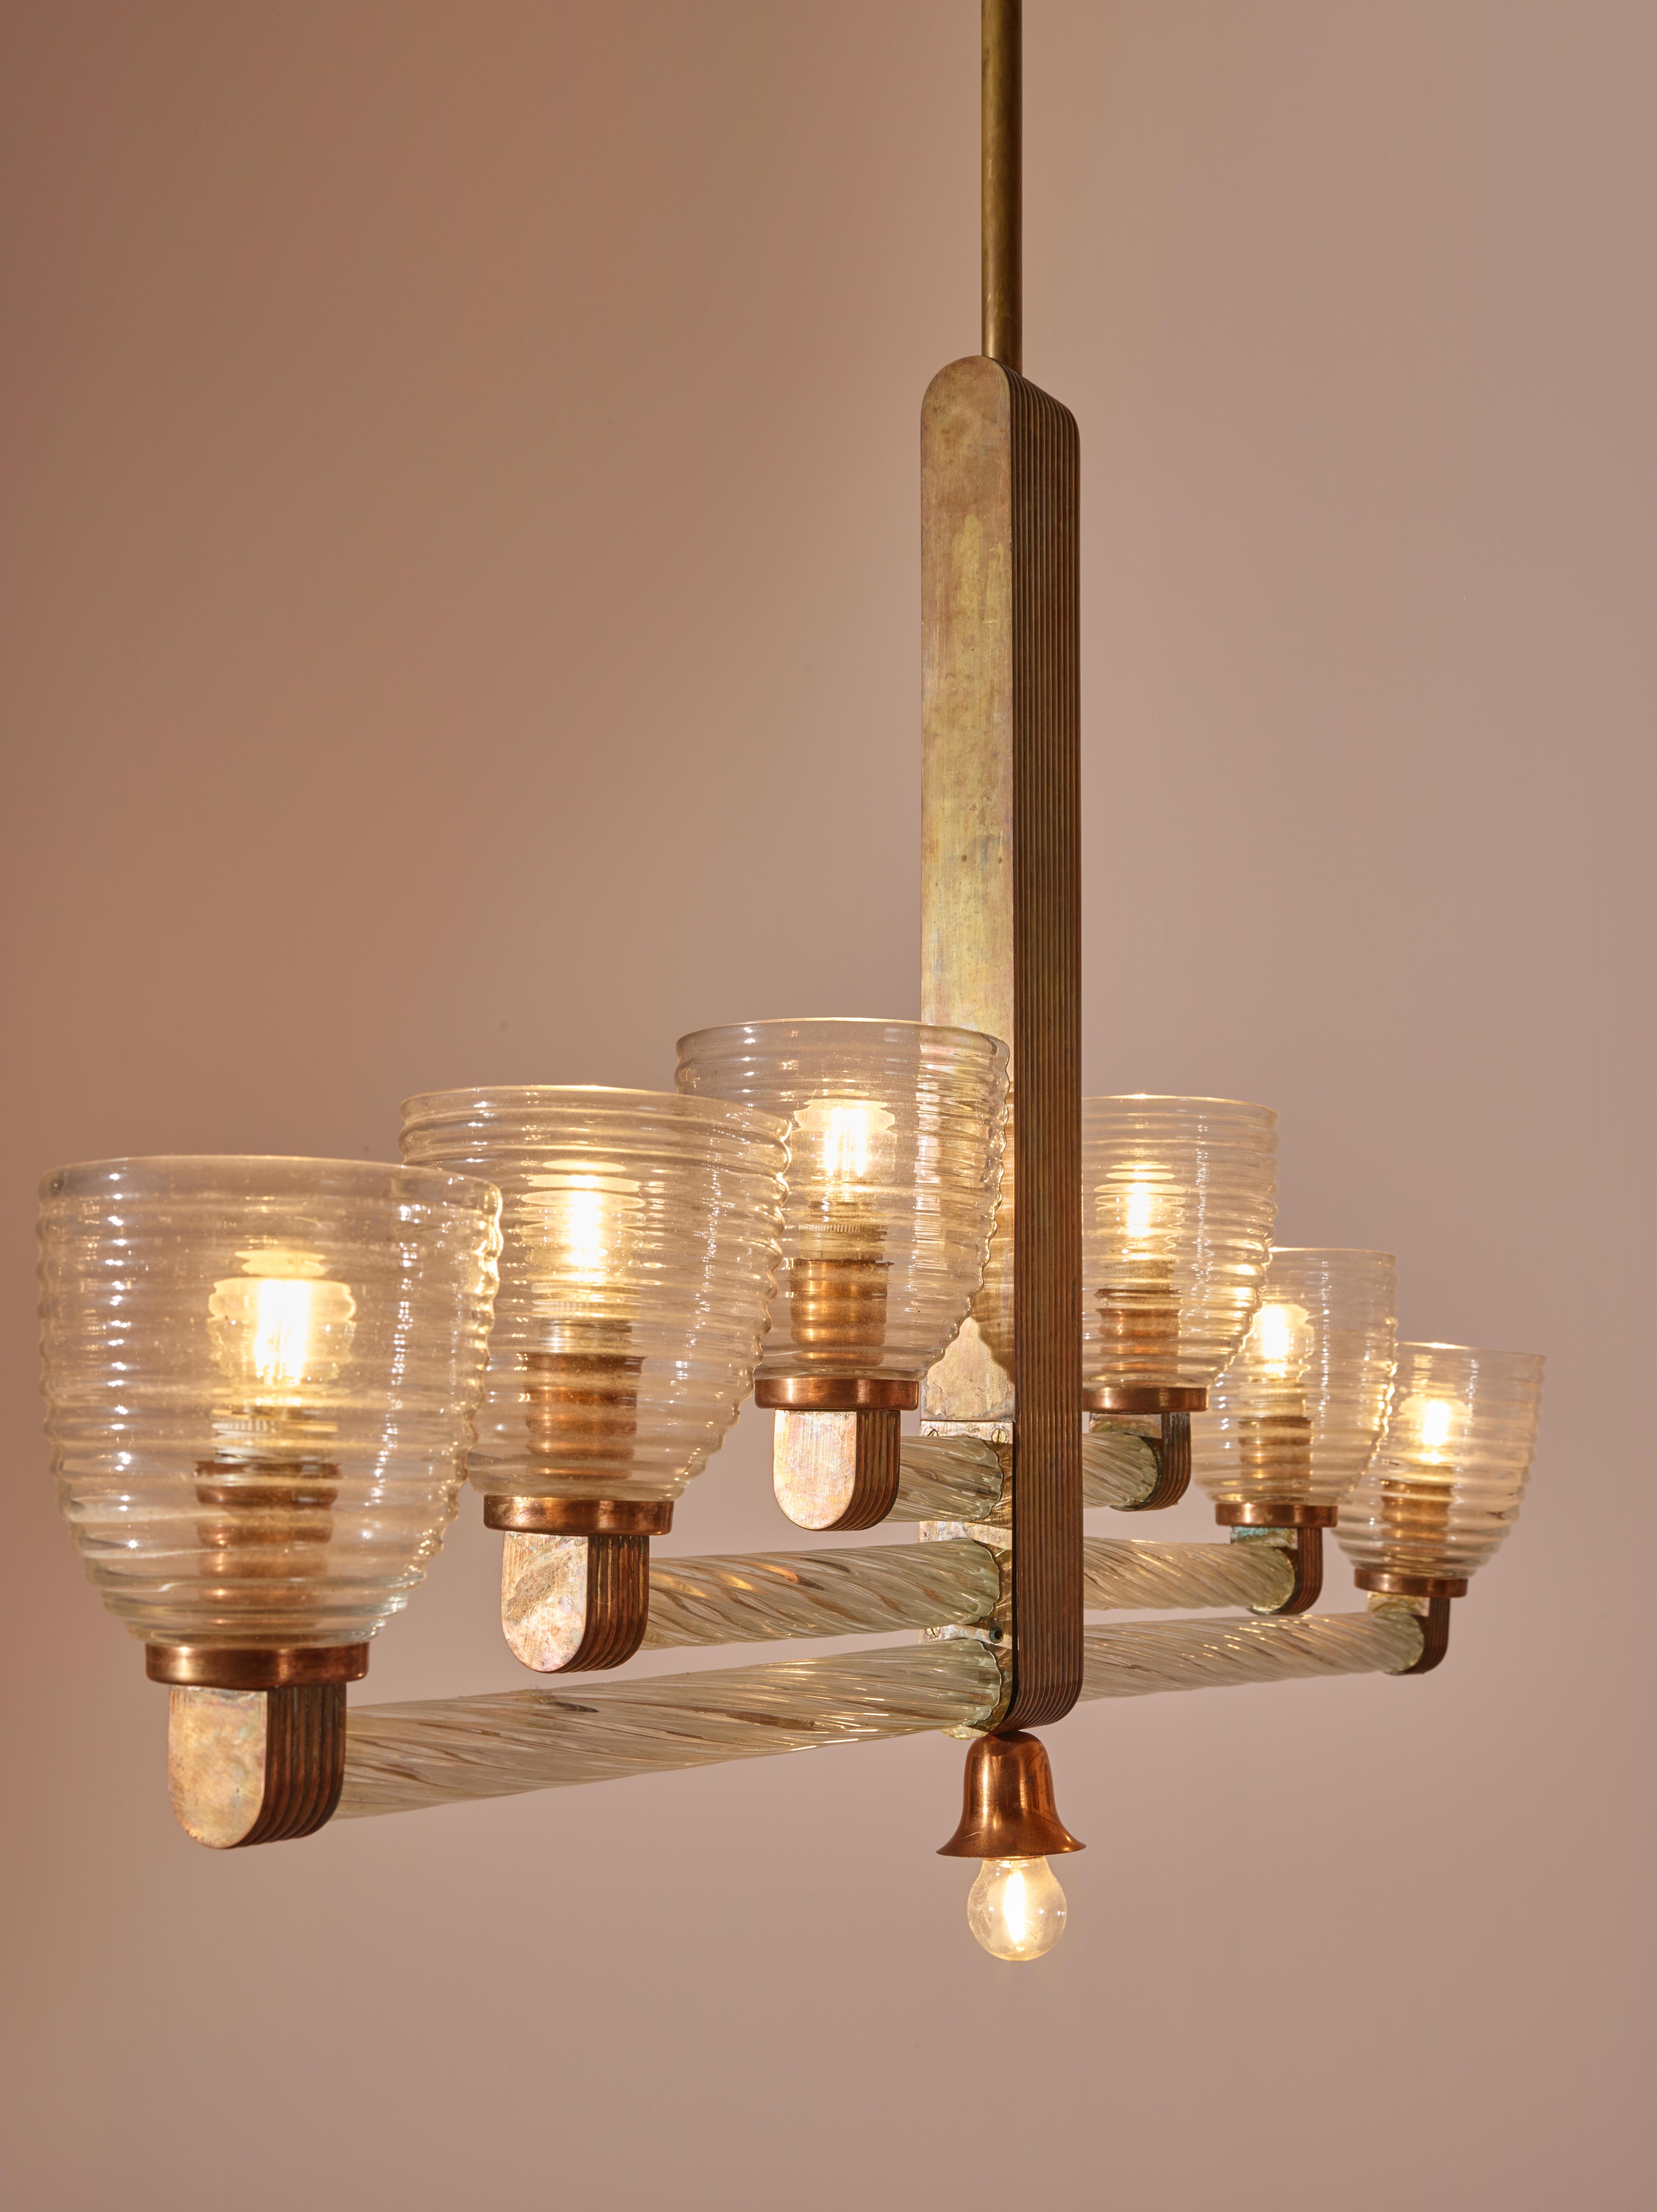 Barovier Seven Lights Chandelier Made of Glass, Brass and Copper, Italy, 1930s In Good Condition In Chiavari, Liguria